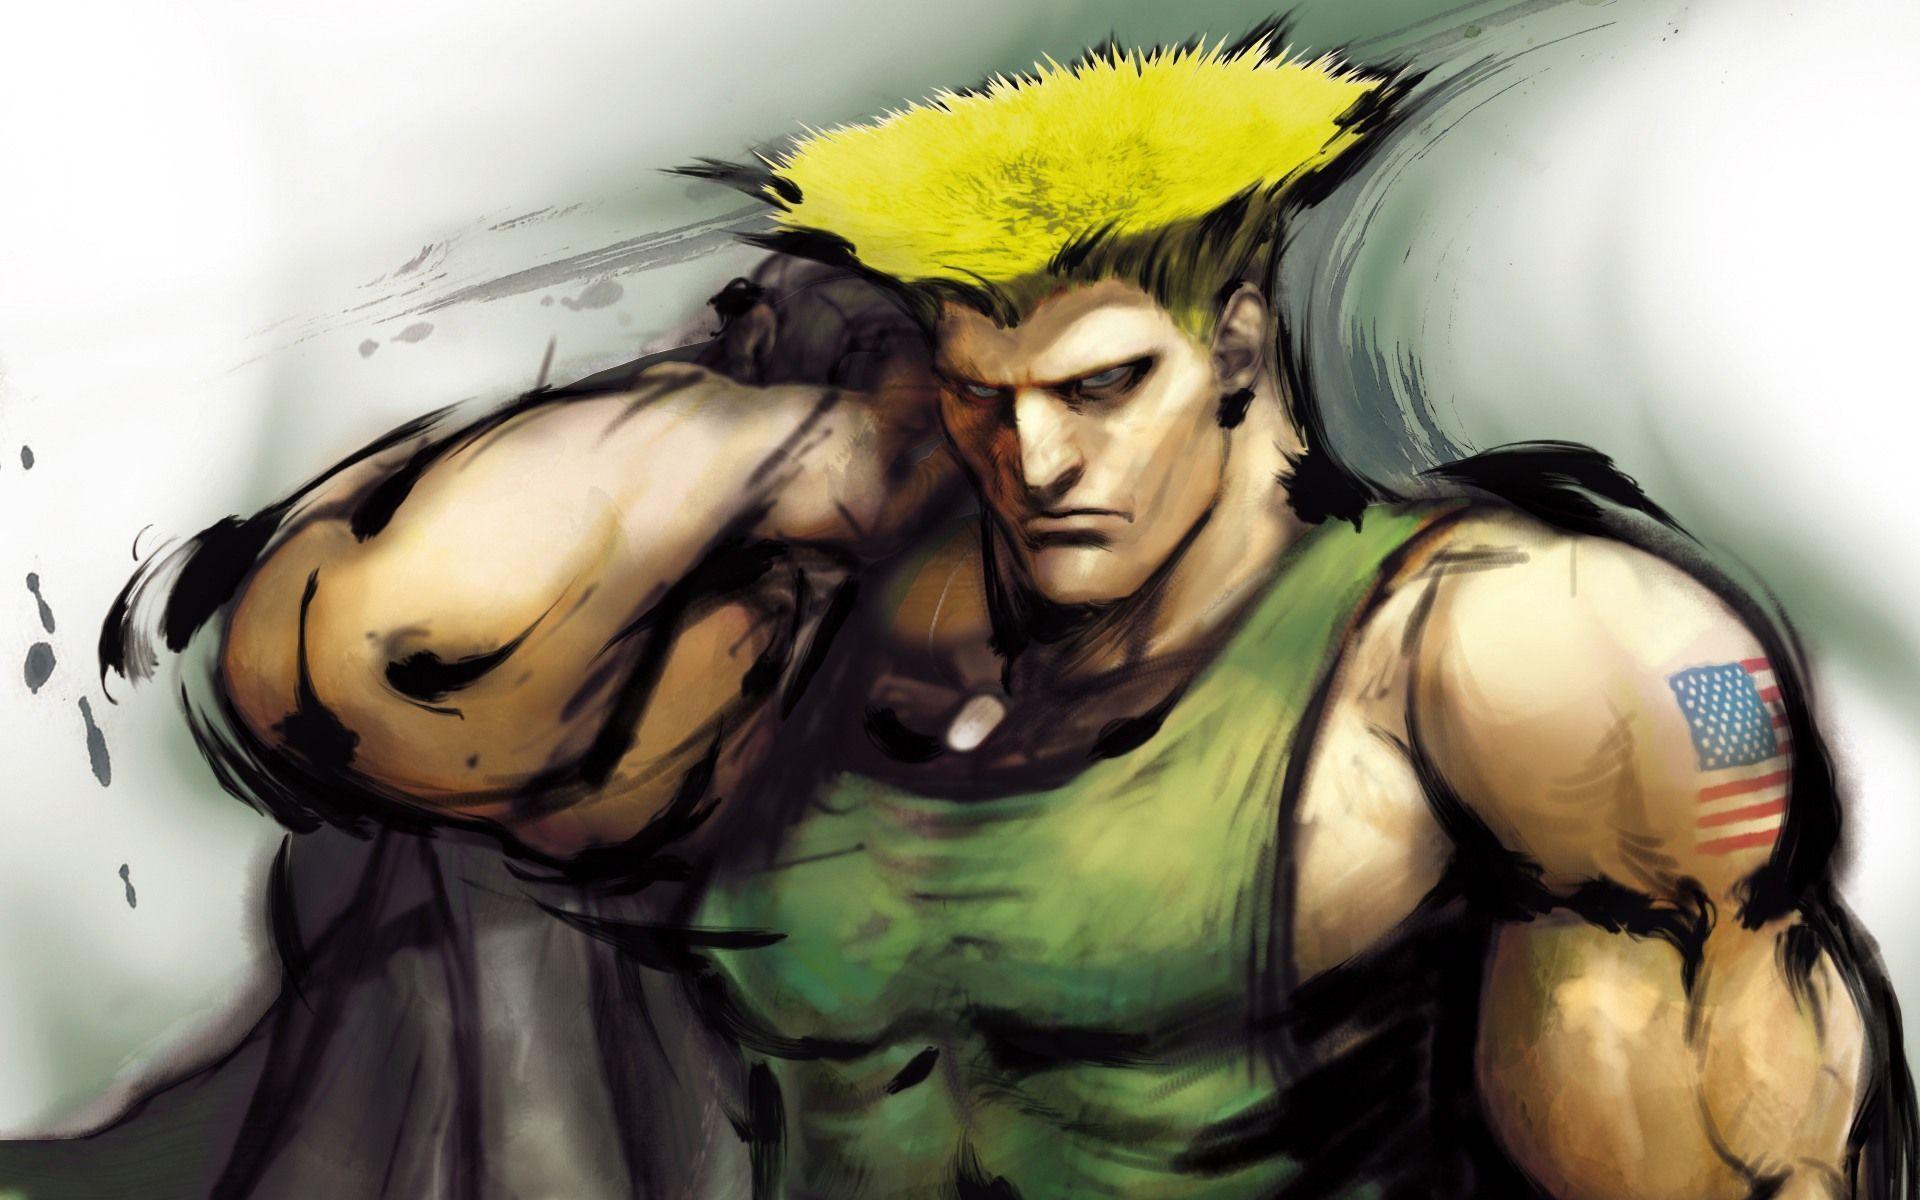 SFIV Guile Classic Fighter - Street Fighter & Video Games Background  Wallpapers on Desktop Nexus (Image 23708)